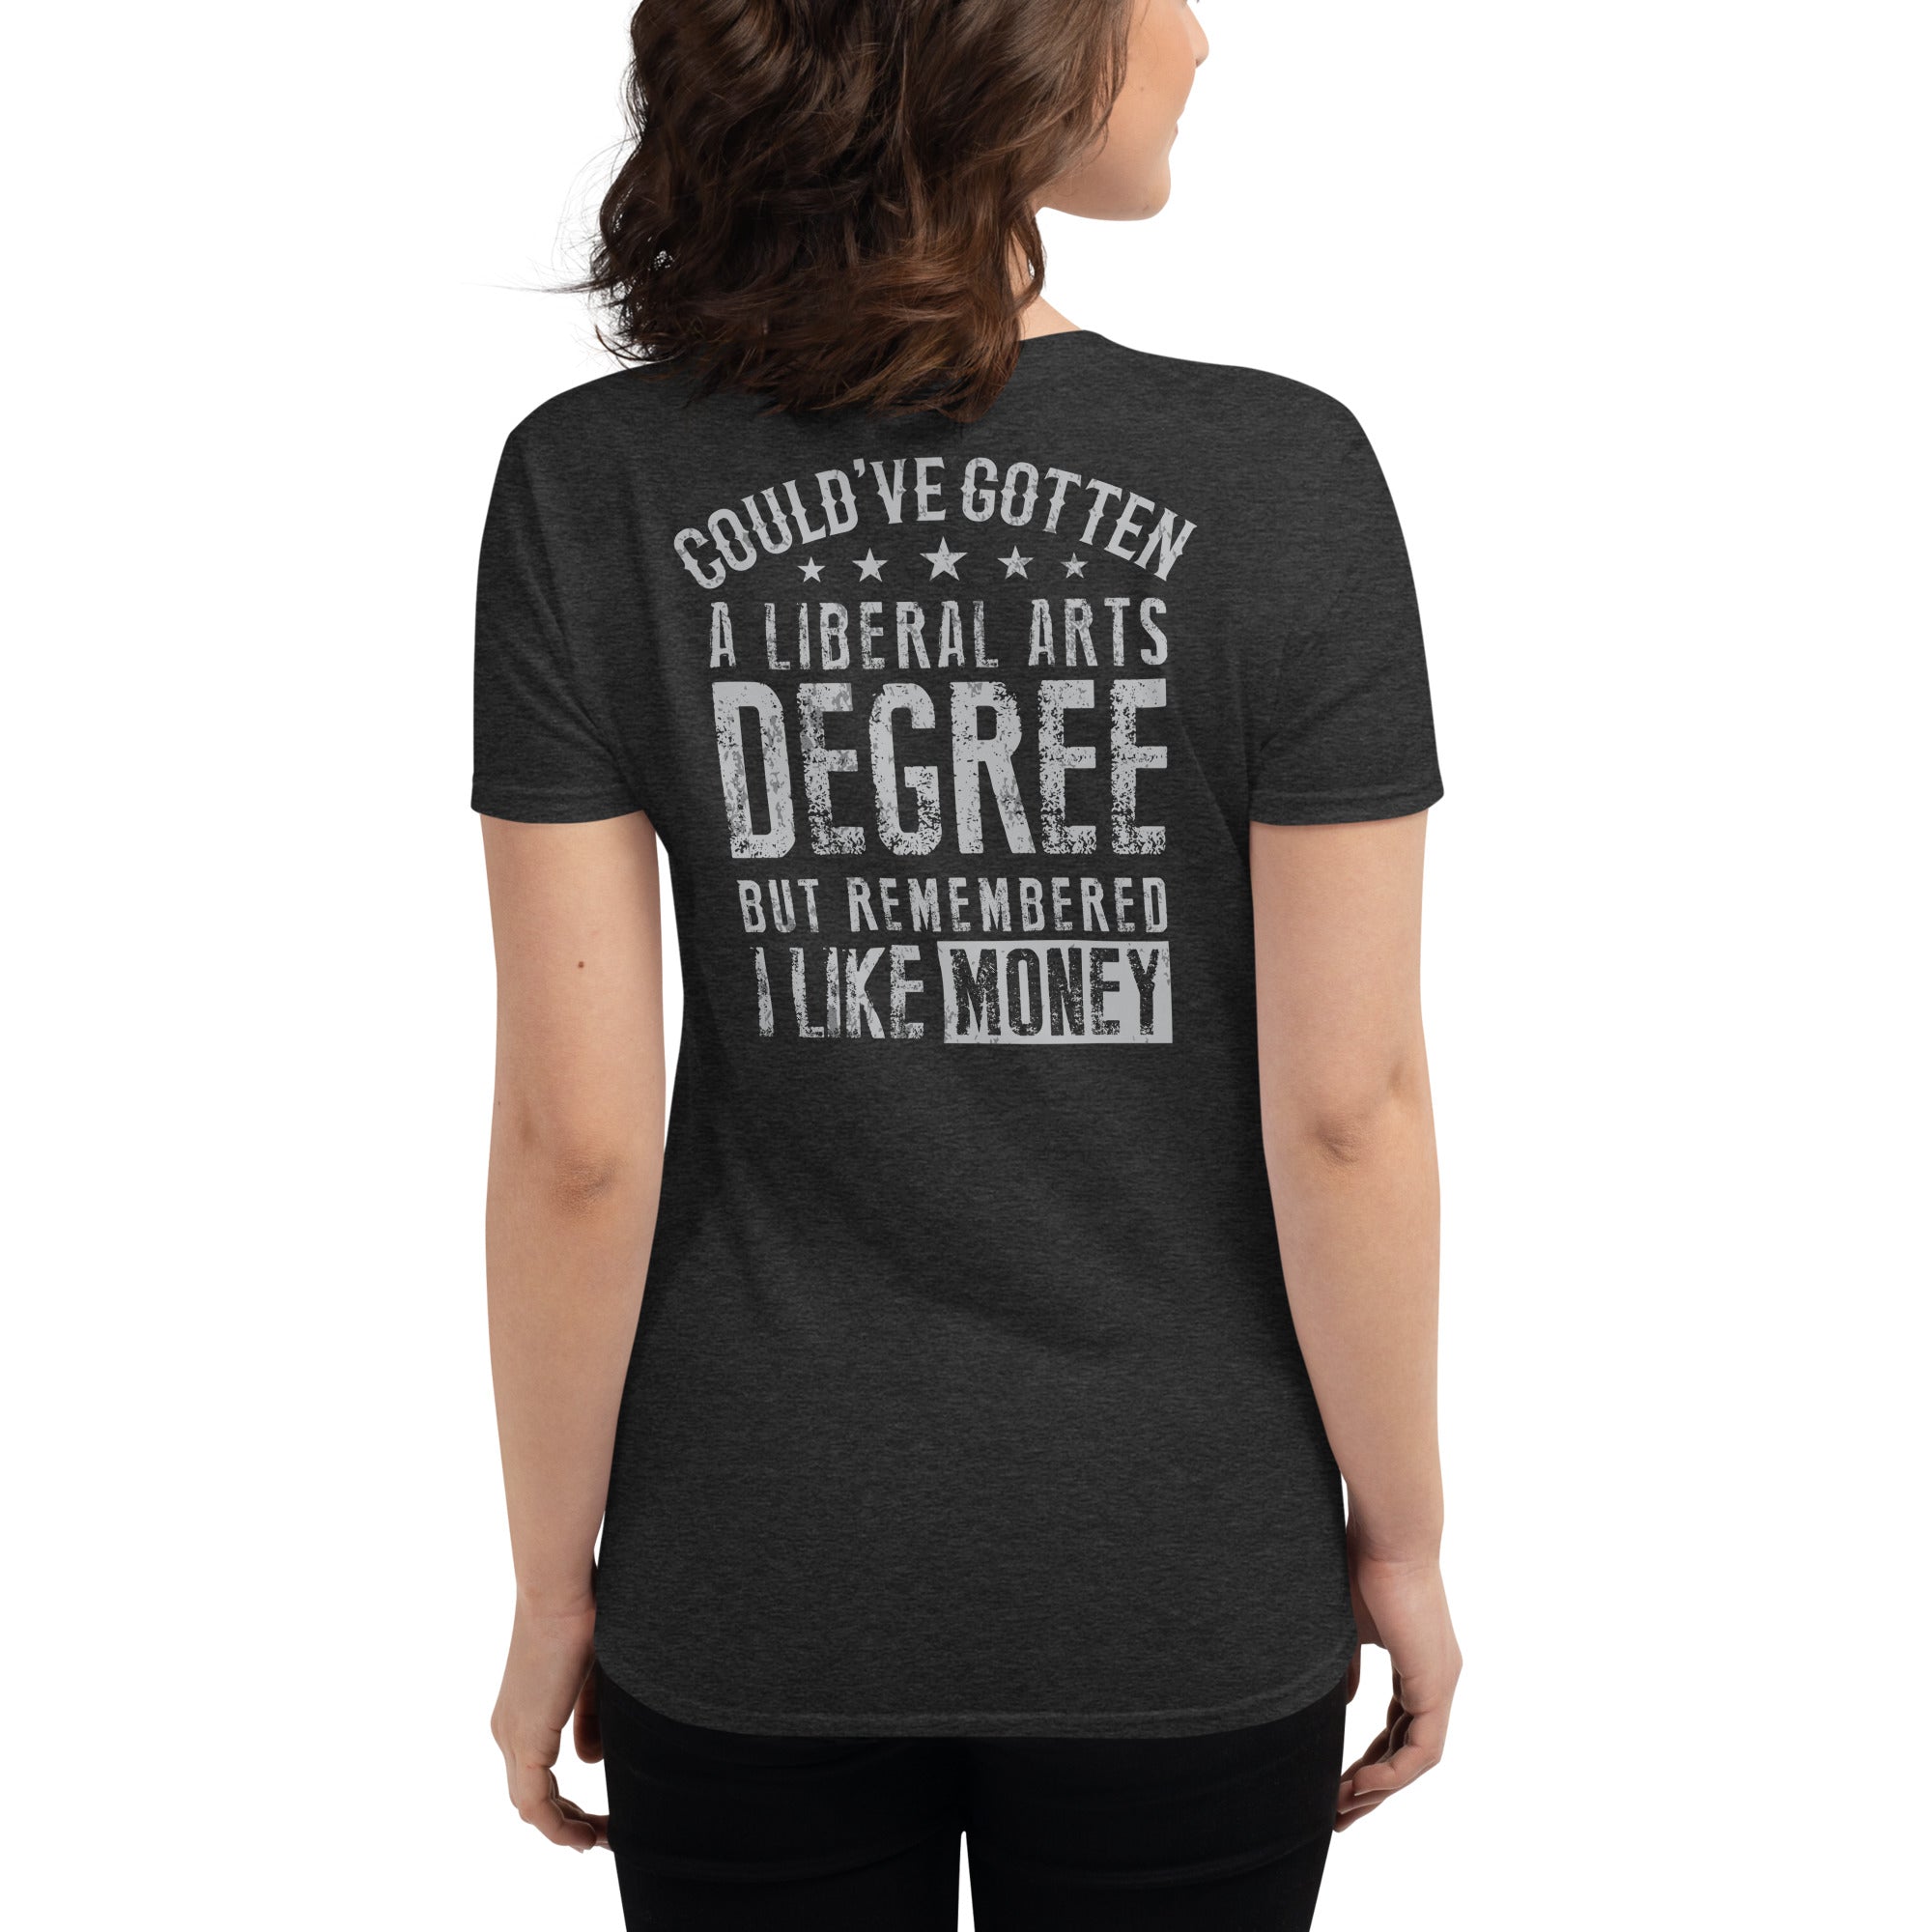 Couldve gotten a Liberal Arts degree but remembered I like money  I  Women's short sleeve t-shirt